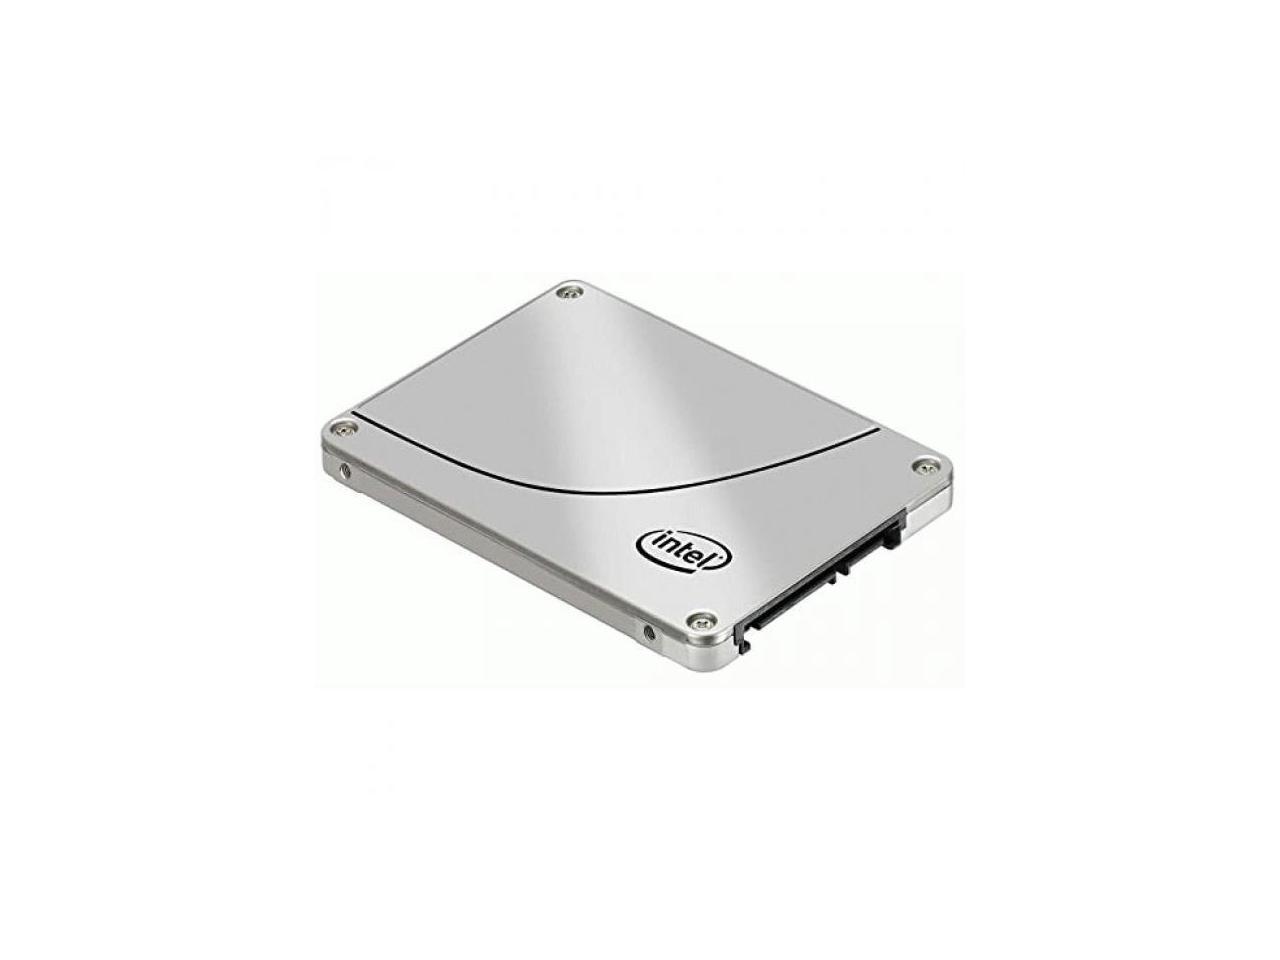 Intel SSDSC2KB480GZ01 D3-S4520 480Gb SATA-6Gbps 2.5-Inch Solid State Drive - image 4 of 5